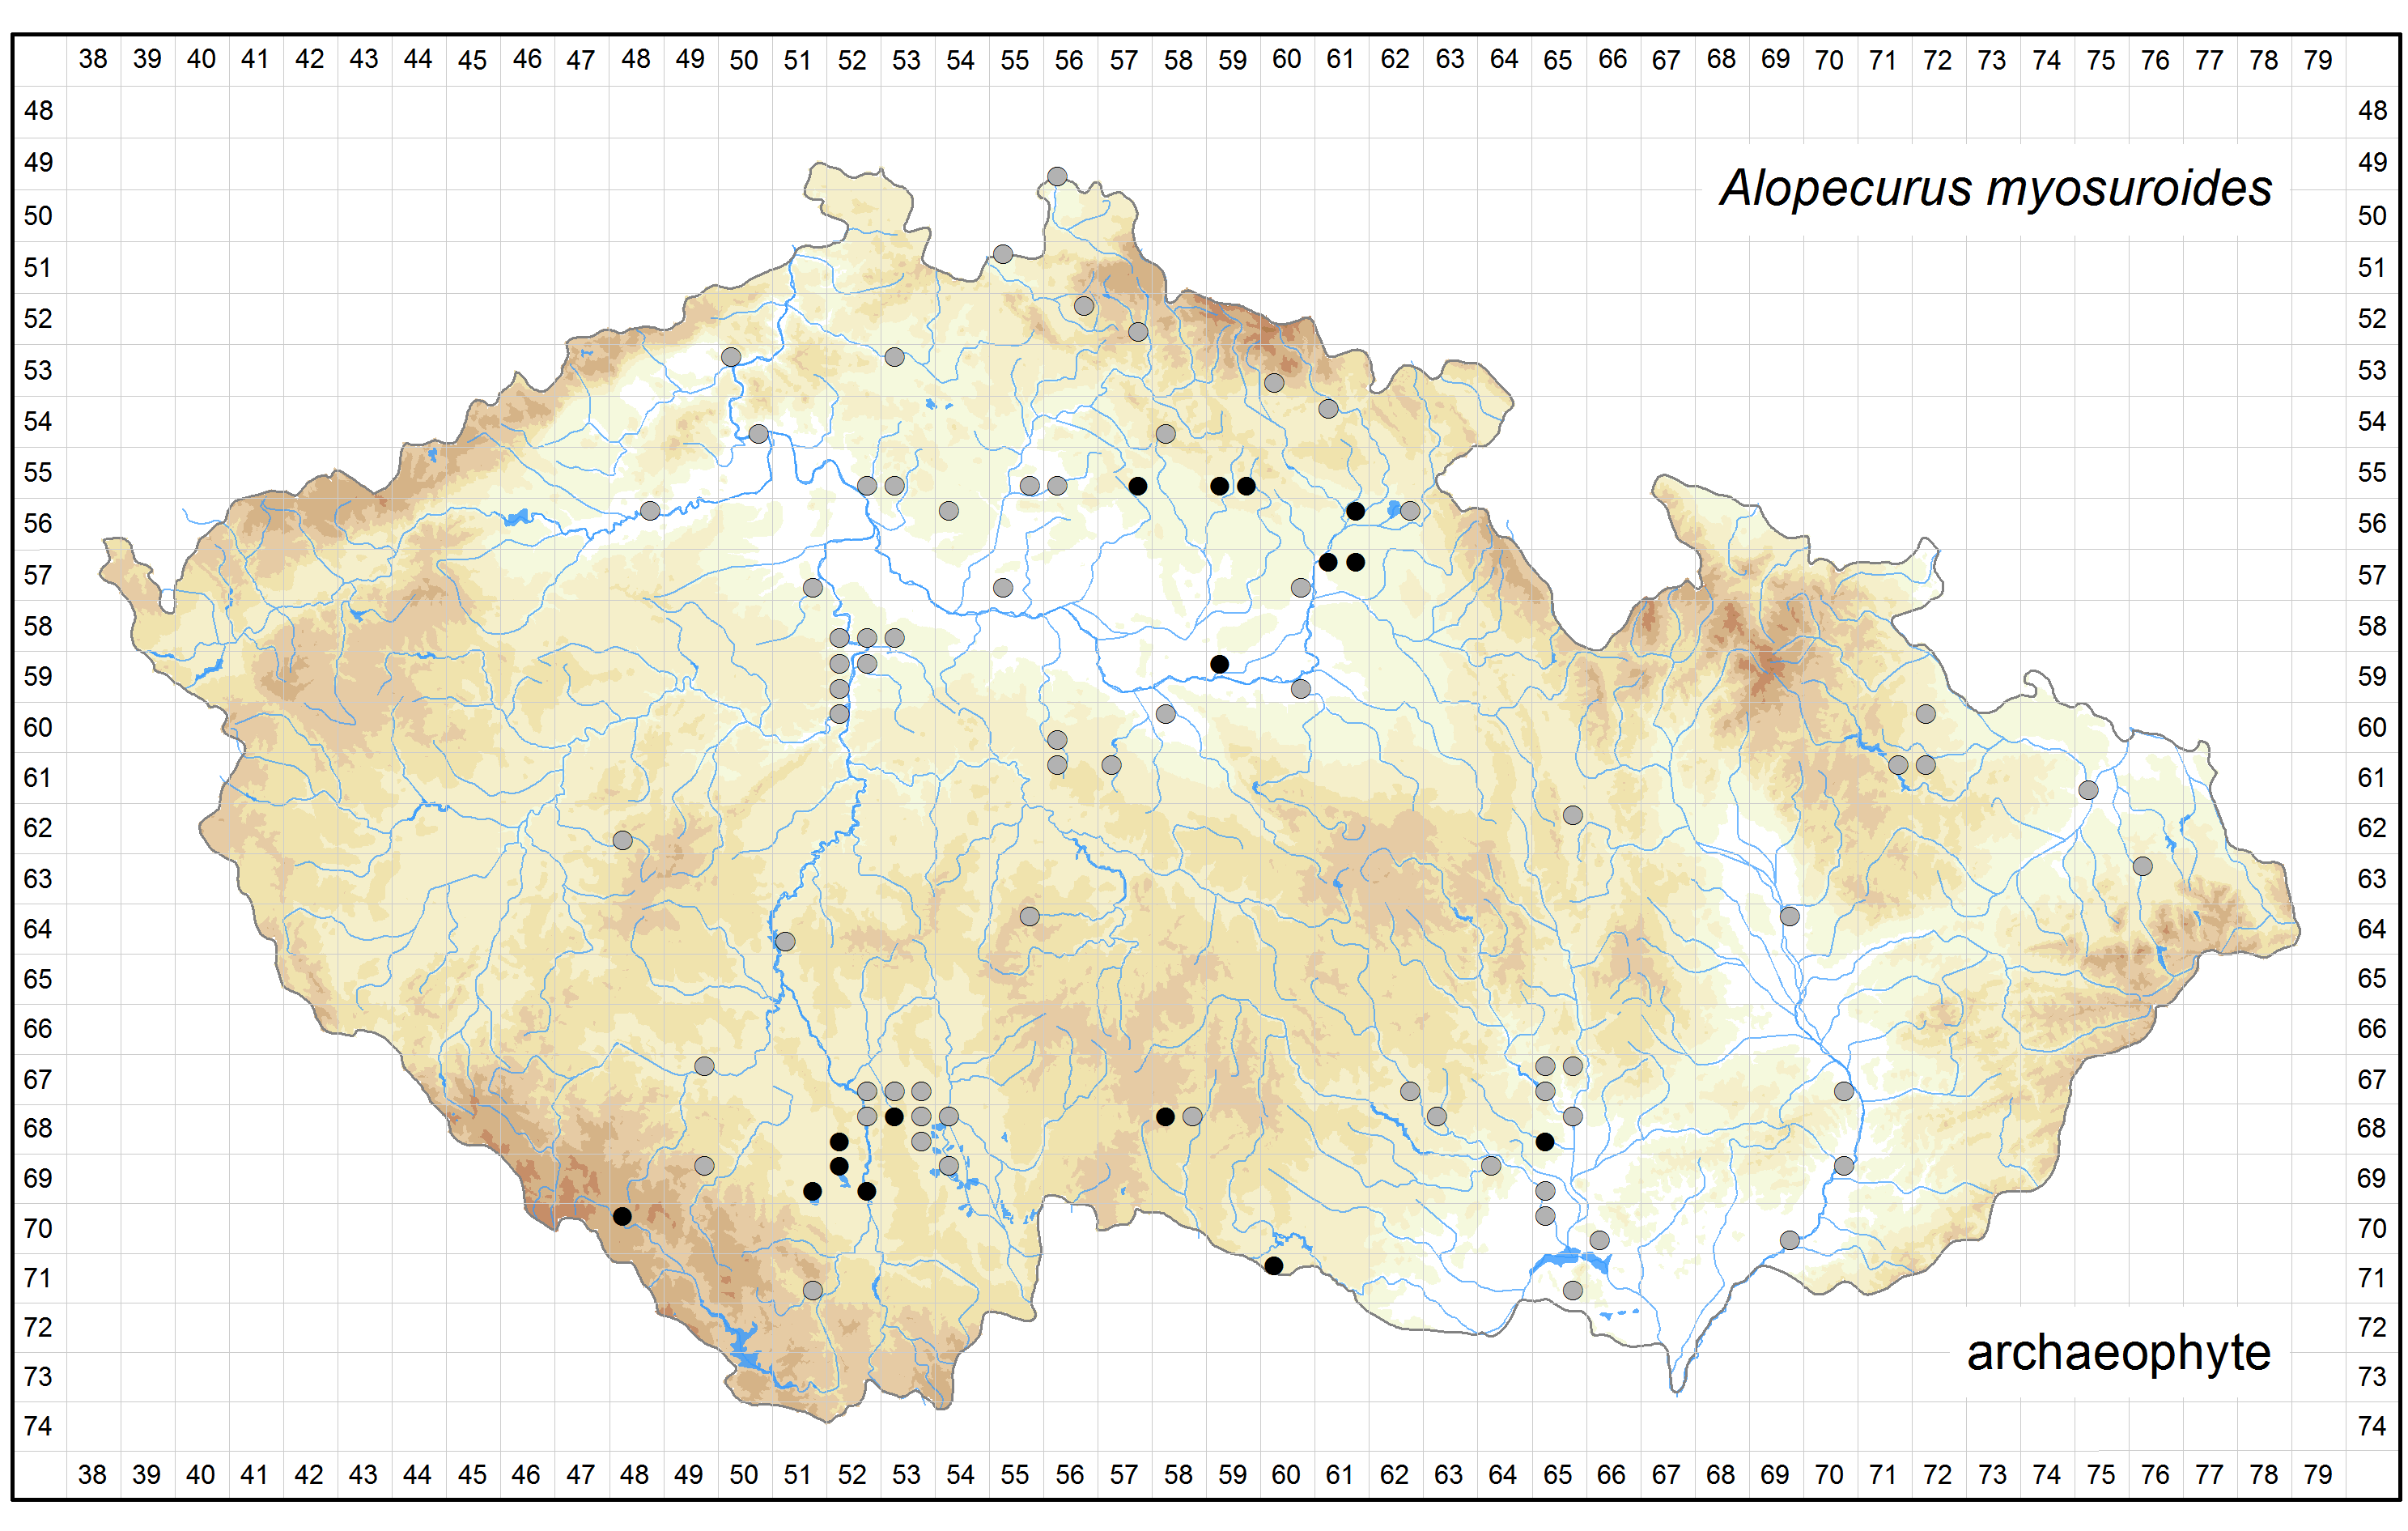 Distribution of Alopecurus myosuroides in the Czech Republic Author of the map: Petr Bureš, Jiří Danihelka Map produced on: 18-11-2015 Database records used for producing the distribution map of